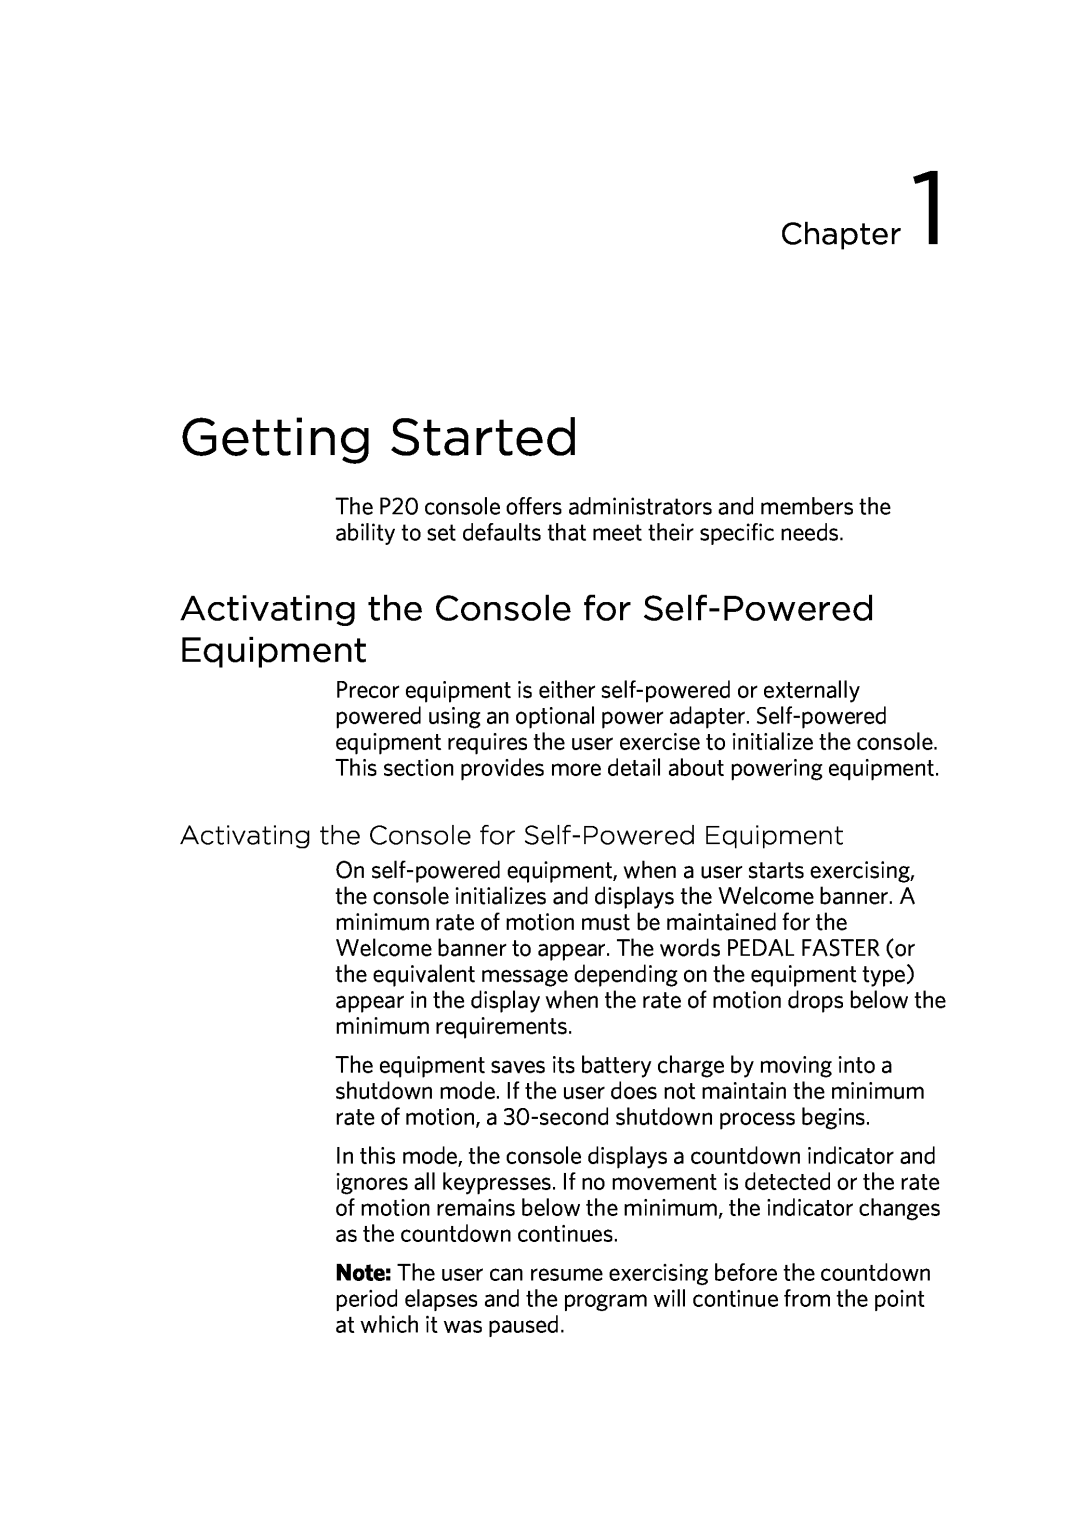 Precor 300753-201 manual Getting Started, Activating the Console for Self-Powered Equipment, Chapter 